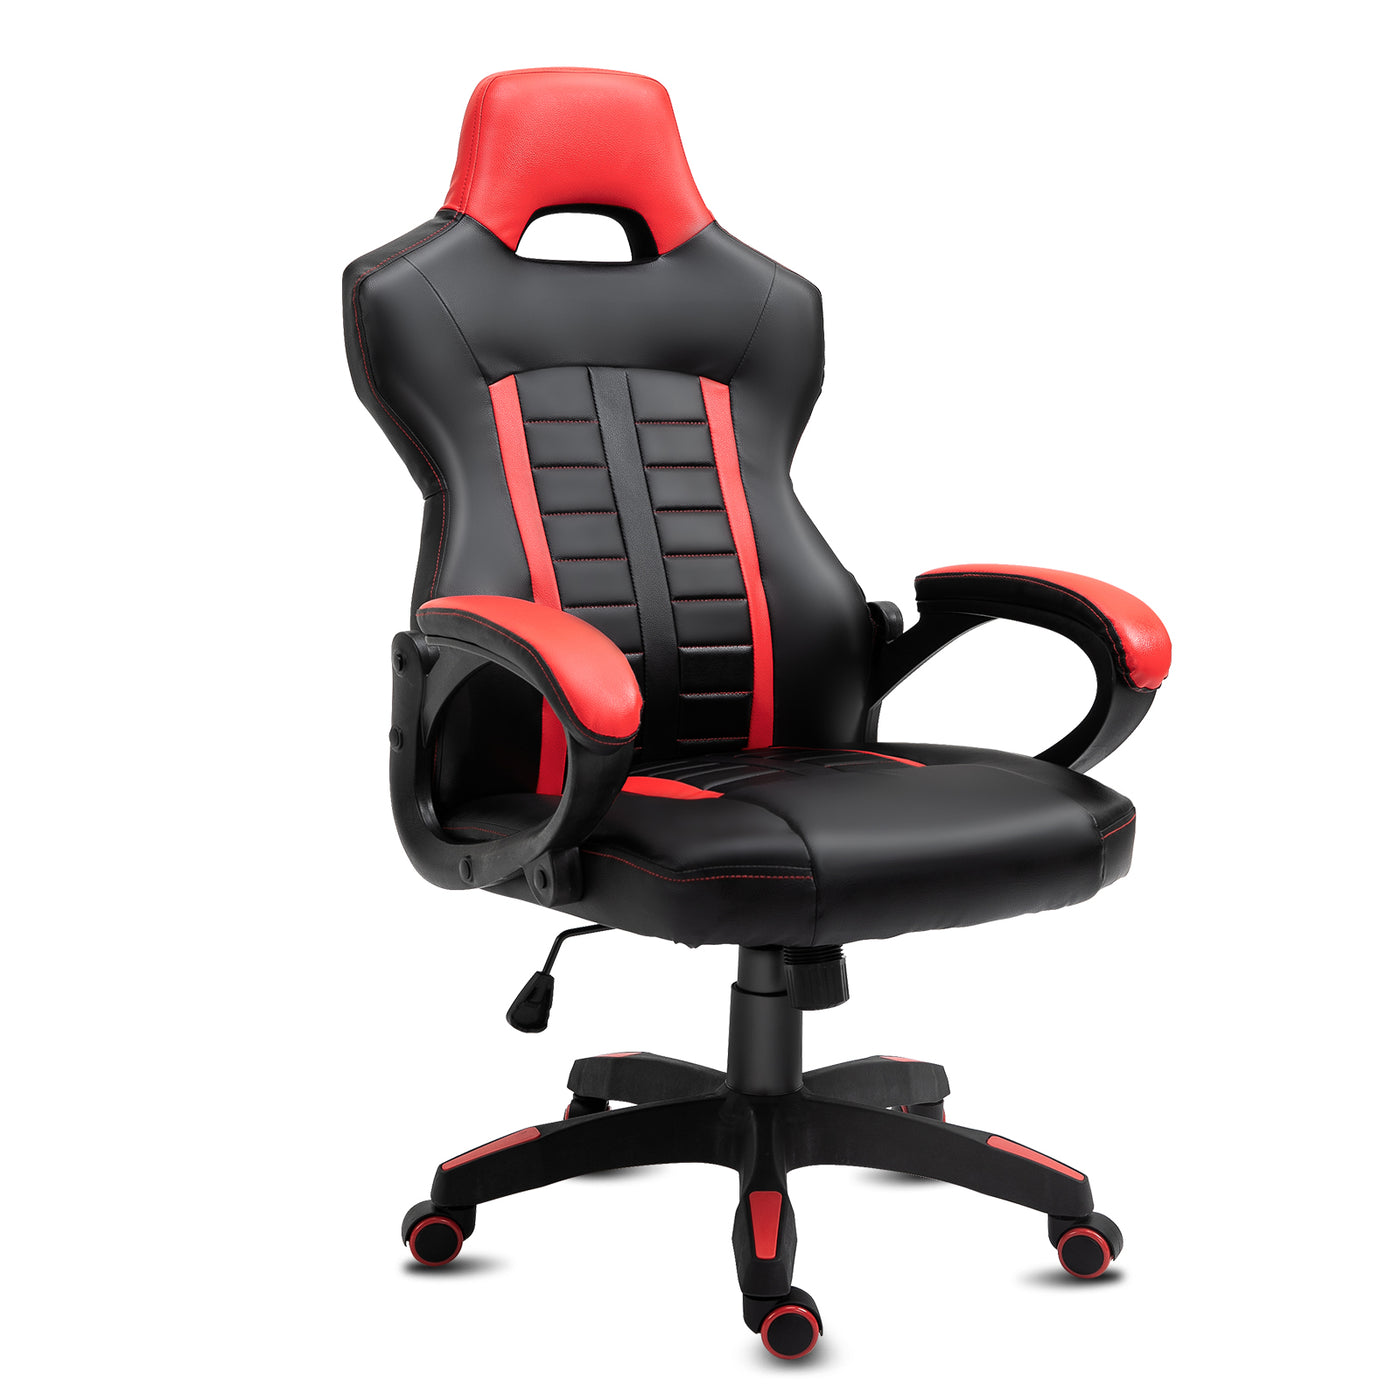 Recliner Swivel Chair Computer Gaming Chair with Footrest Adjustable Office Desk